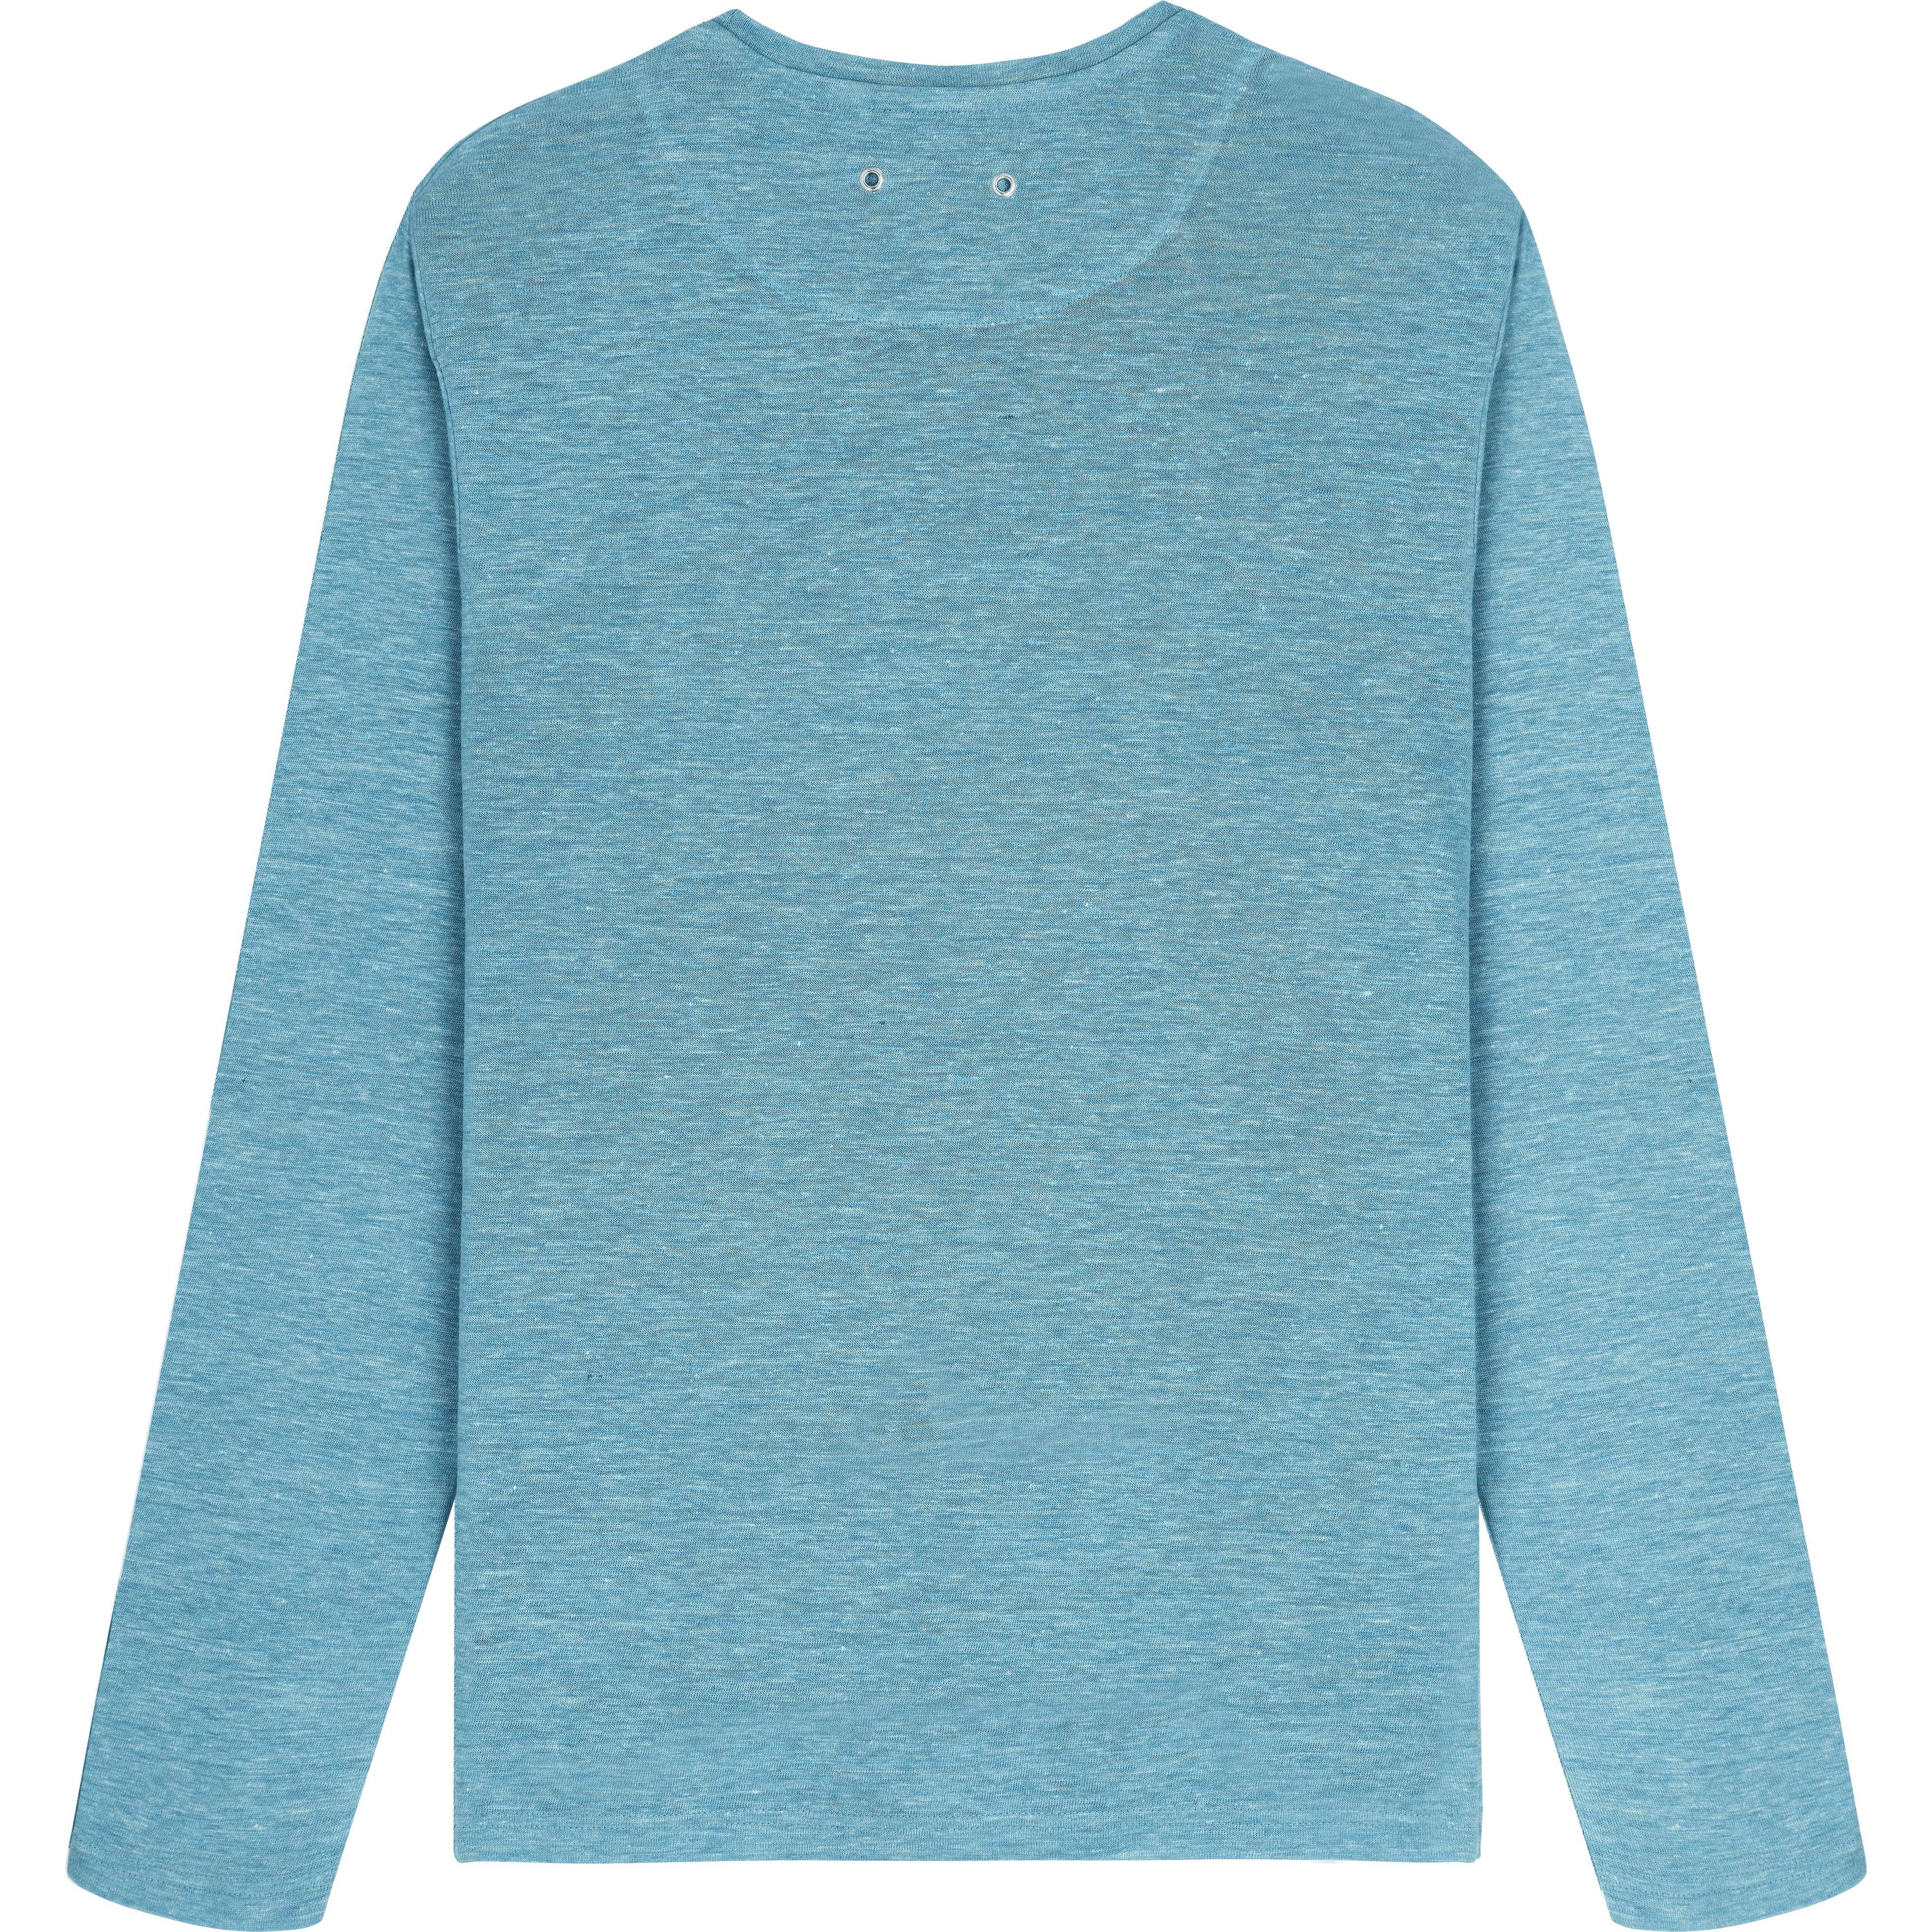 Unisex Linen Long Sleeves T-shirt Solid - 2